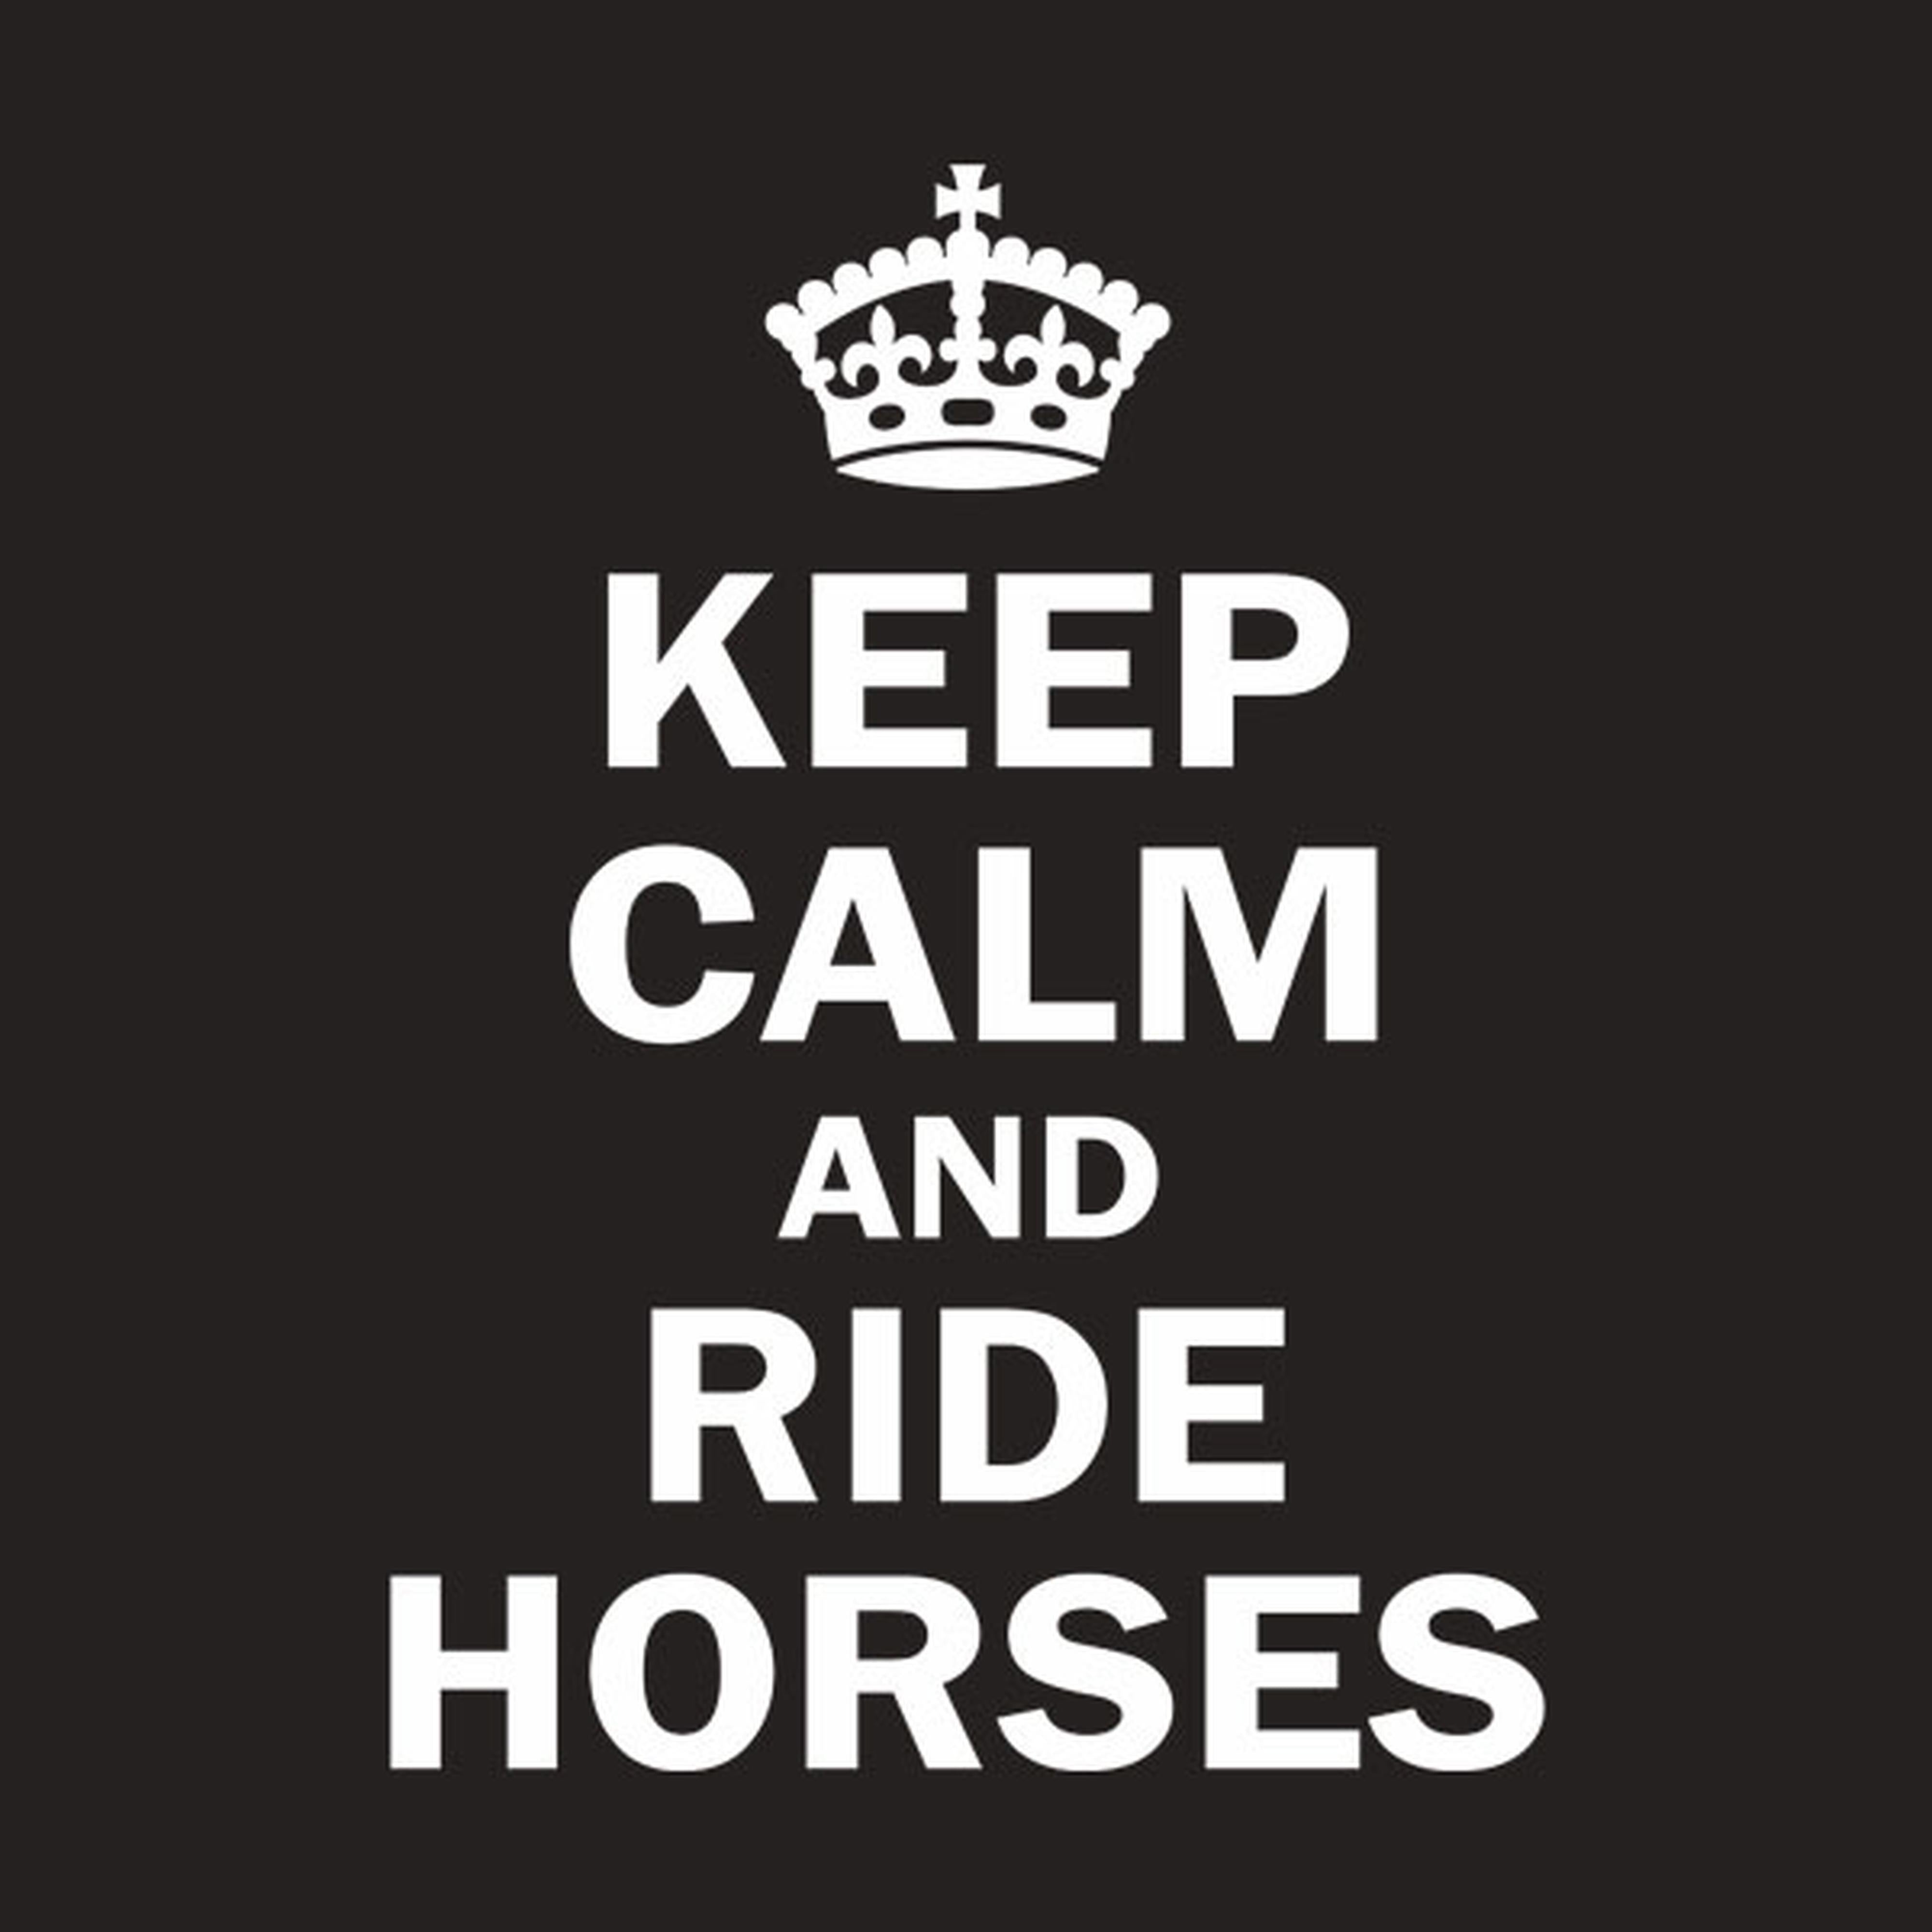 Keep calm and ride horses